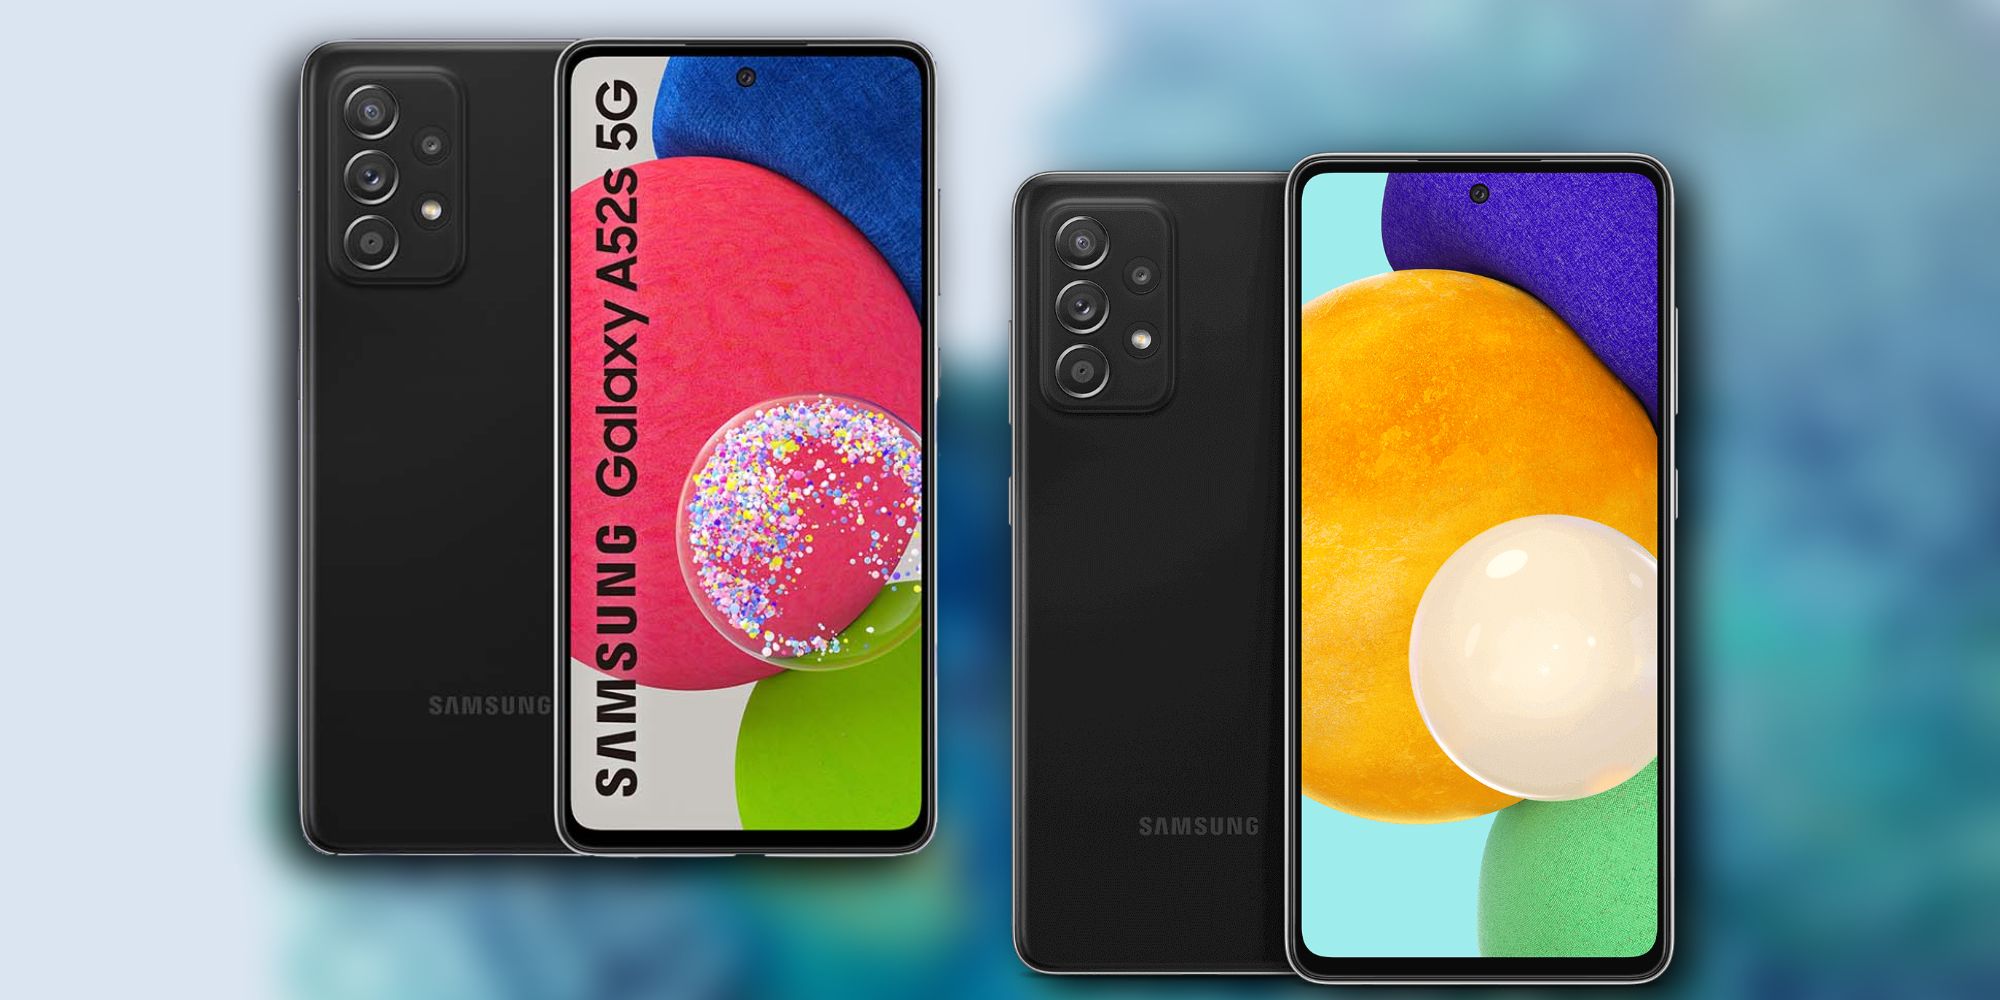 Galaxy A52s 5G Vs. Galaxy A52 5G: What's New & Different?